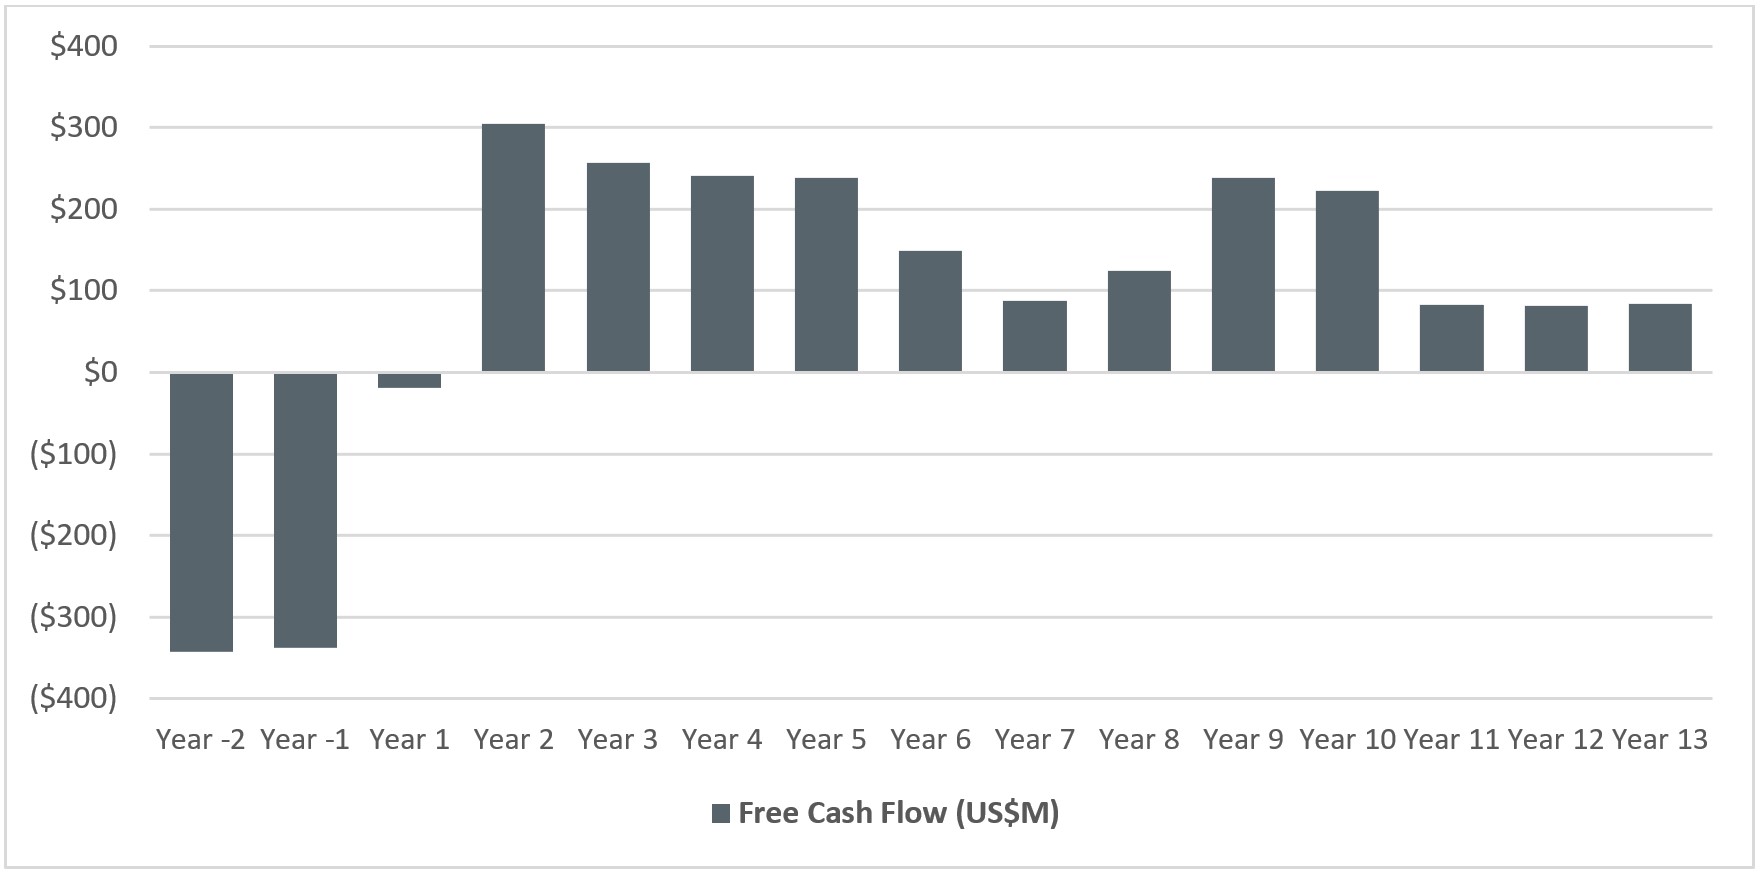 Chart 2 – Free Cash Flow by Year